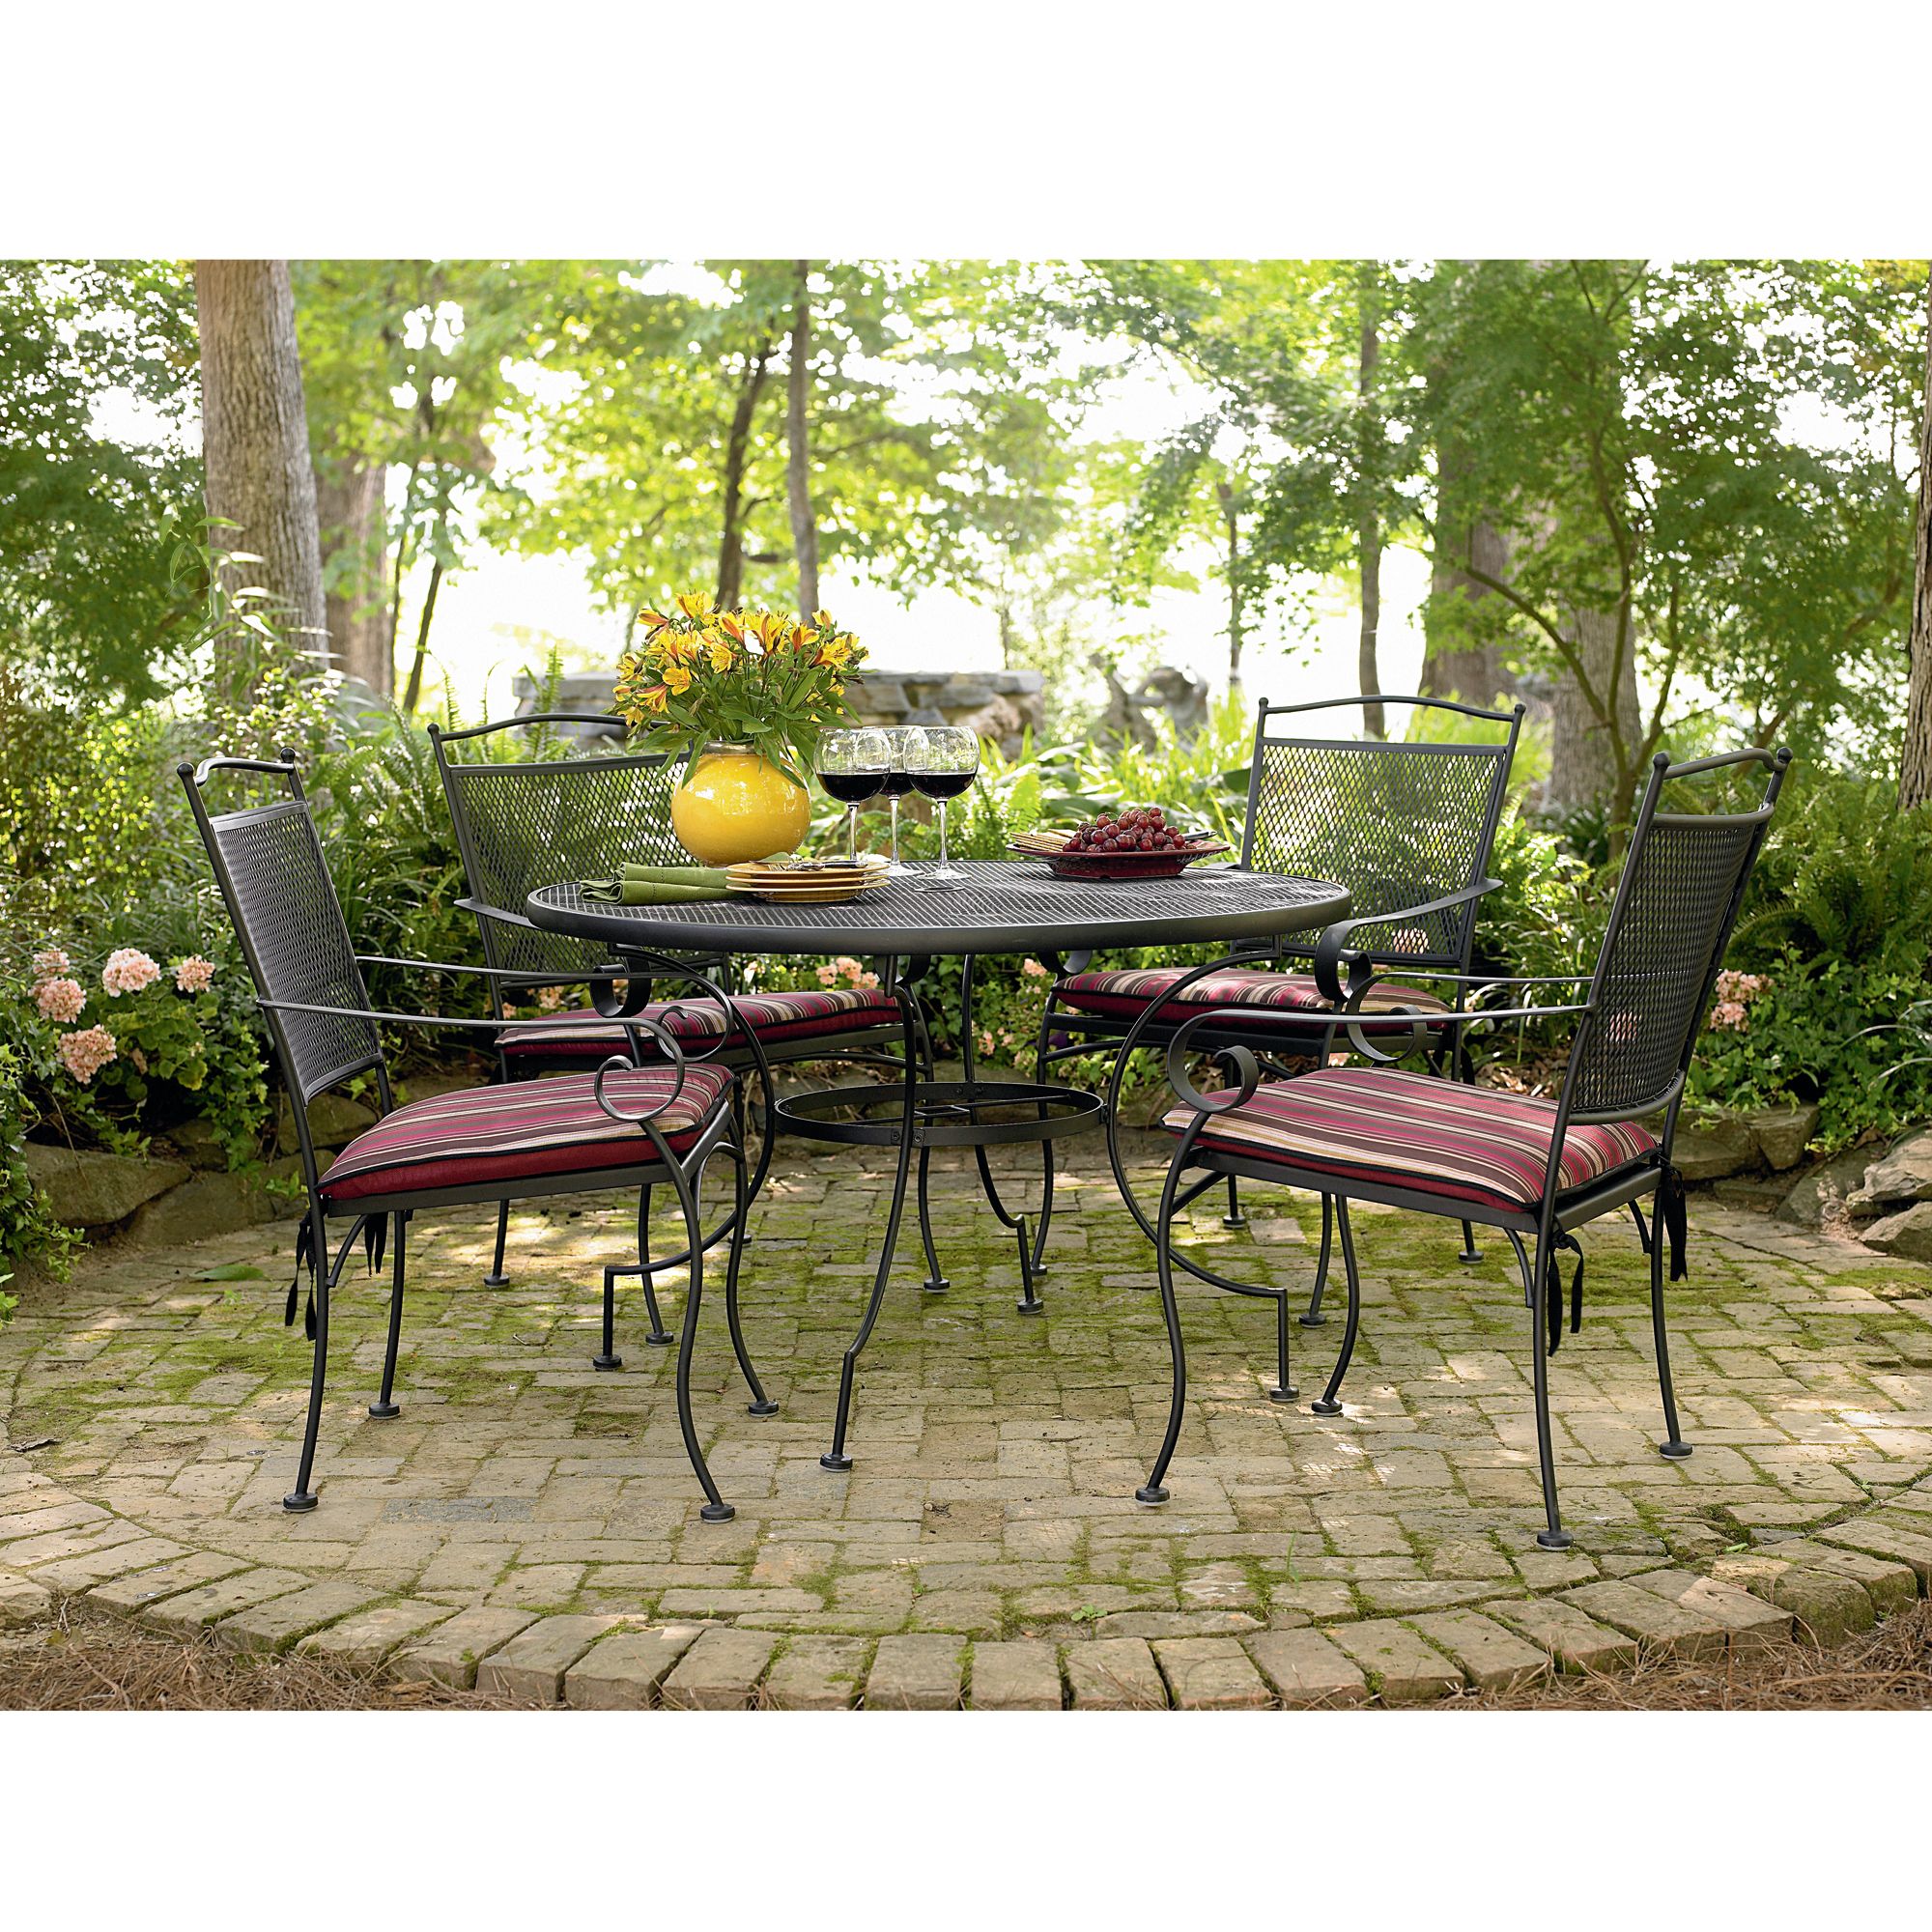 Find Garden Oasis available in the Garden Oasis Collections ...